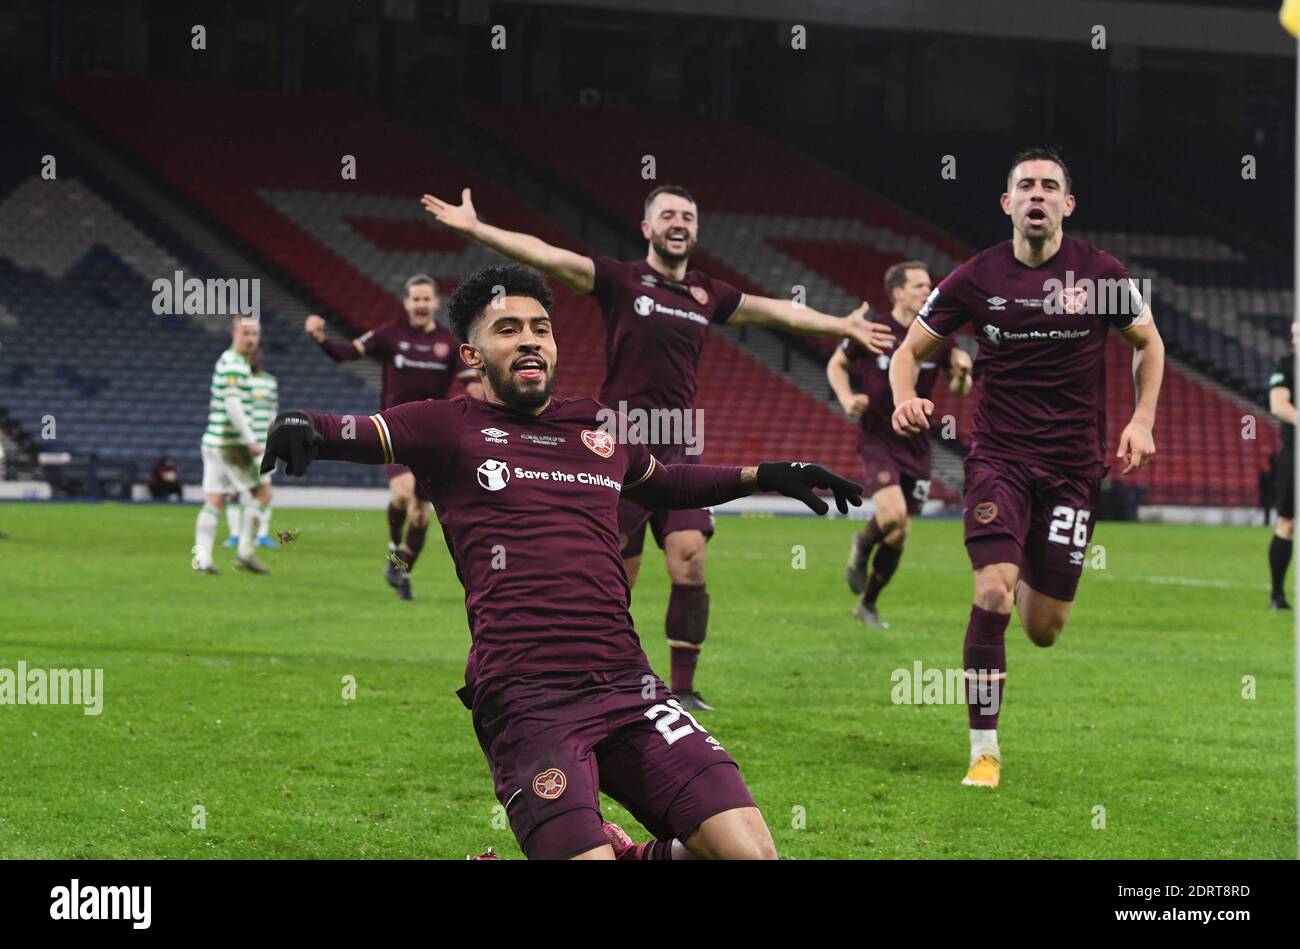 Hampden Park, Glasgow, Scotland, UK.  20th December, 2020. William Hill Scottish Cup Final 2019-20.  Pic shows Hearts Josh Ginnelly (L) celebrating his equalising goal in the 3-3 draw AET 4-3 with Craig Halkett & Olly Lee. Credit: eric mccowat/Alamy Live News Stock Photo